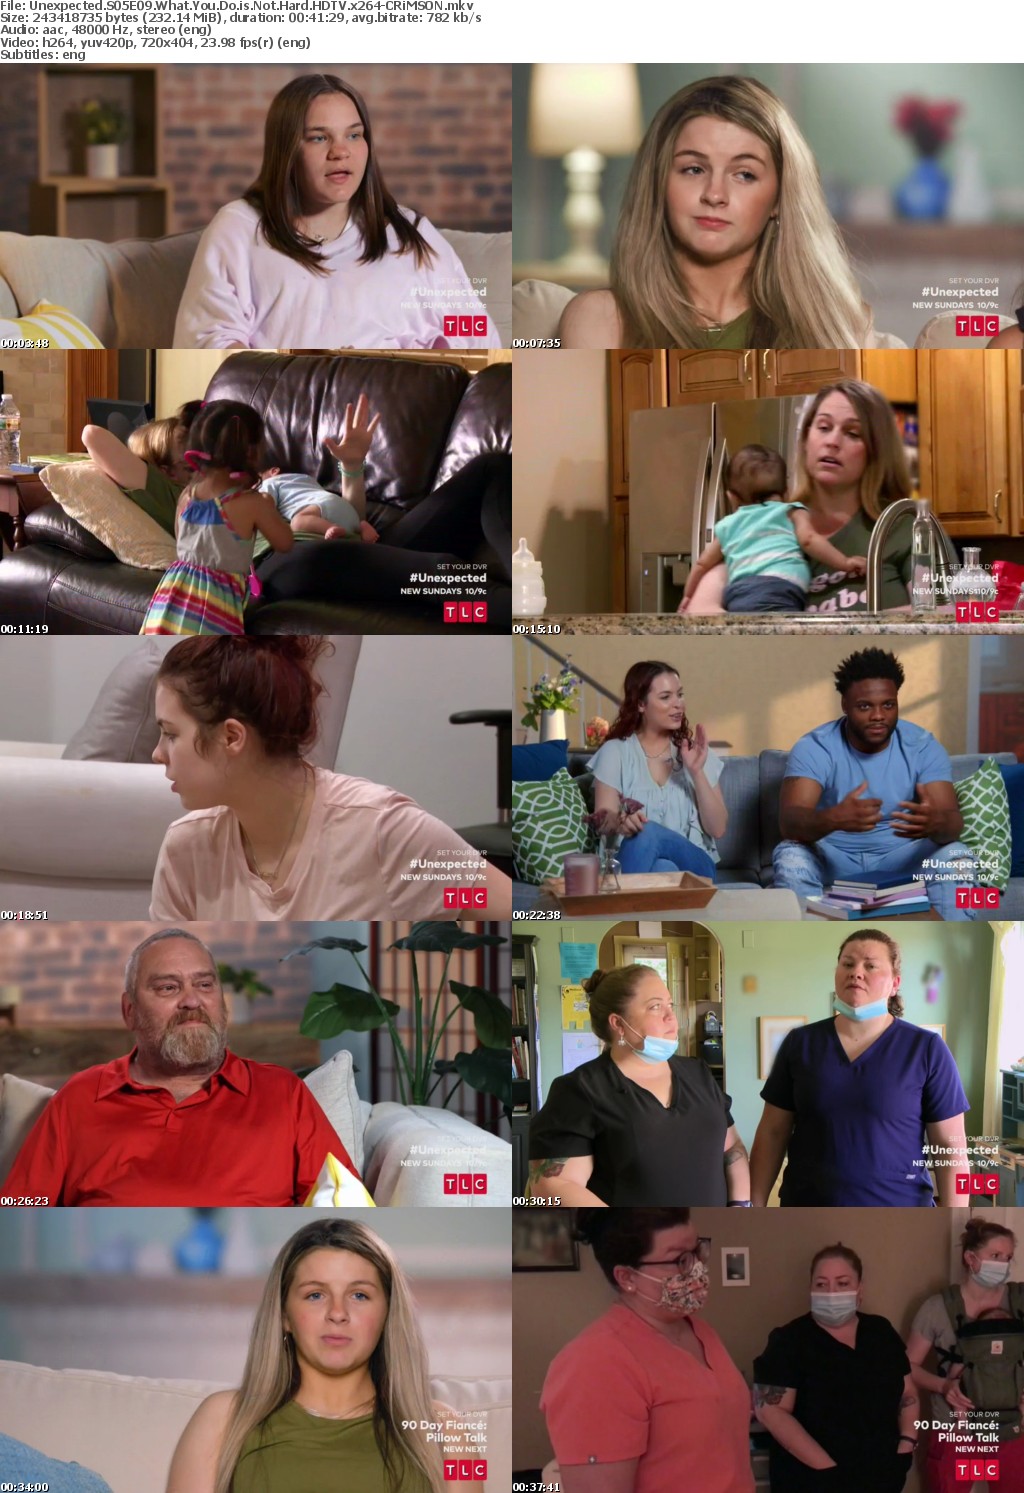 Unexpected S05E09 What You Do is Not Hard HDTV x264-CRiMSON